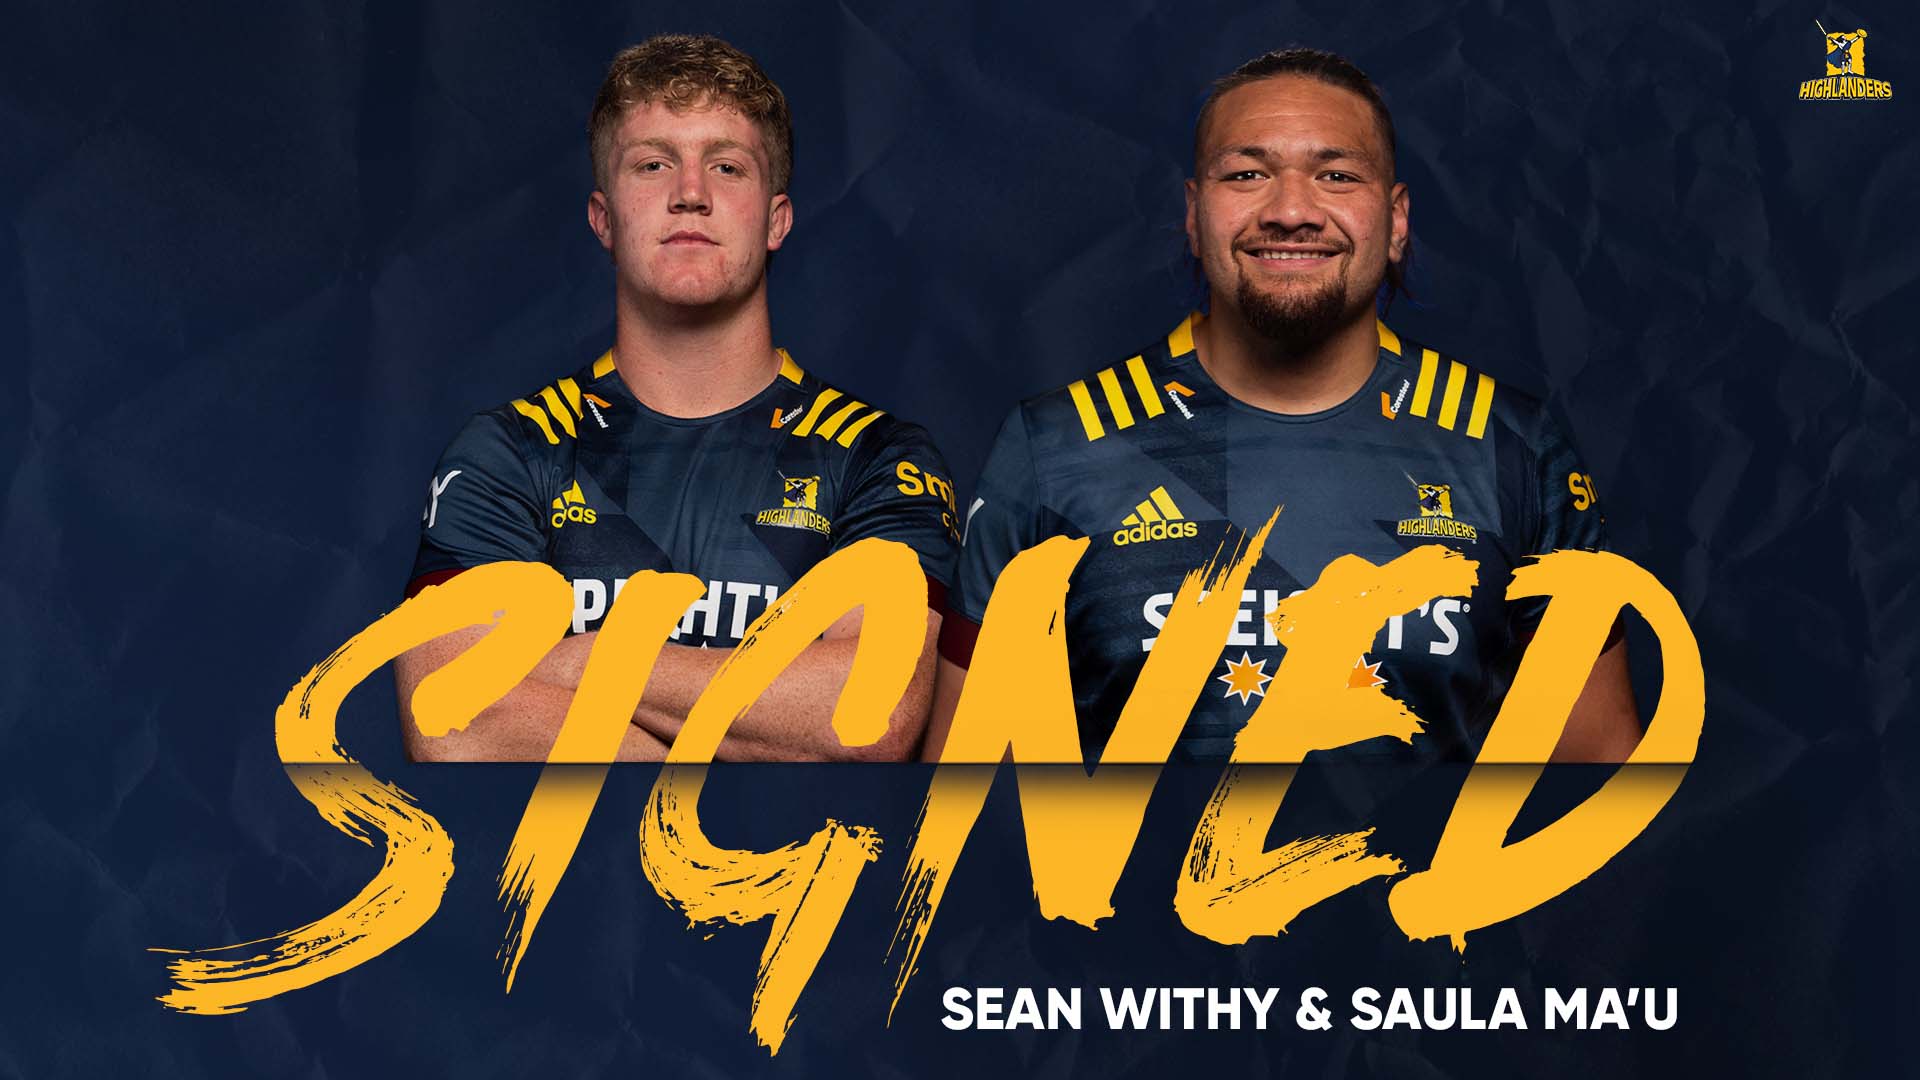 Highlanders invest in the future | Highlanders Rugby Club Limited Partnership